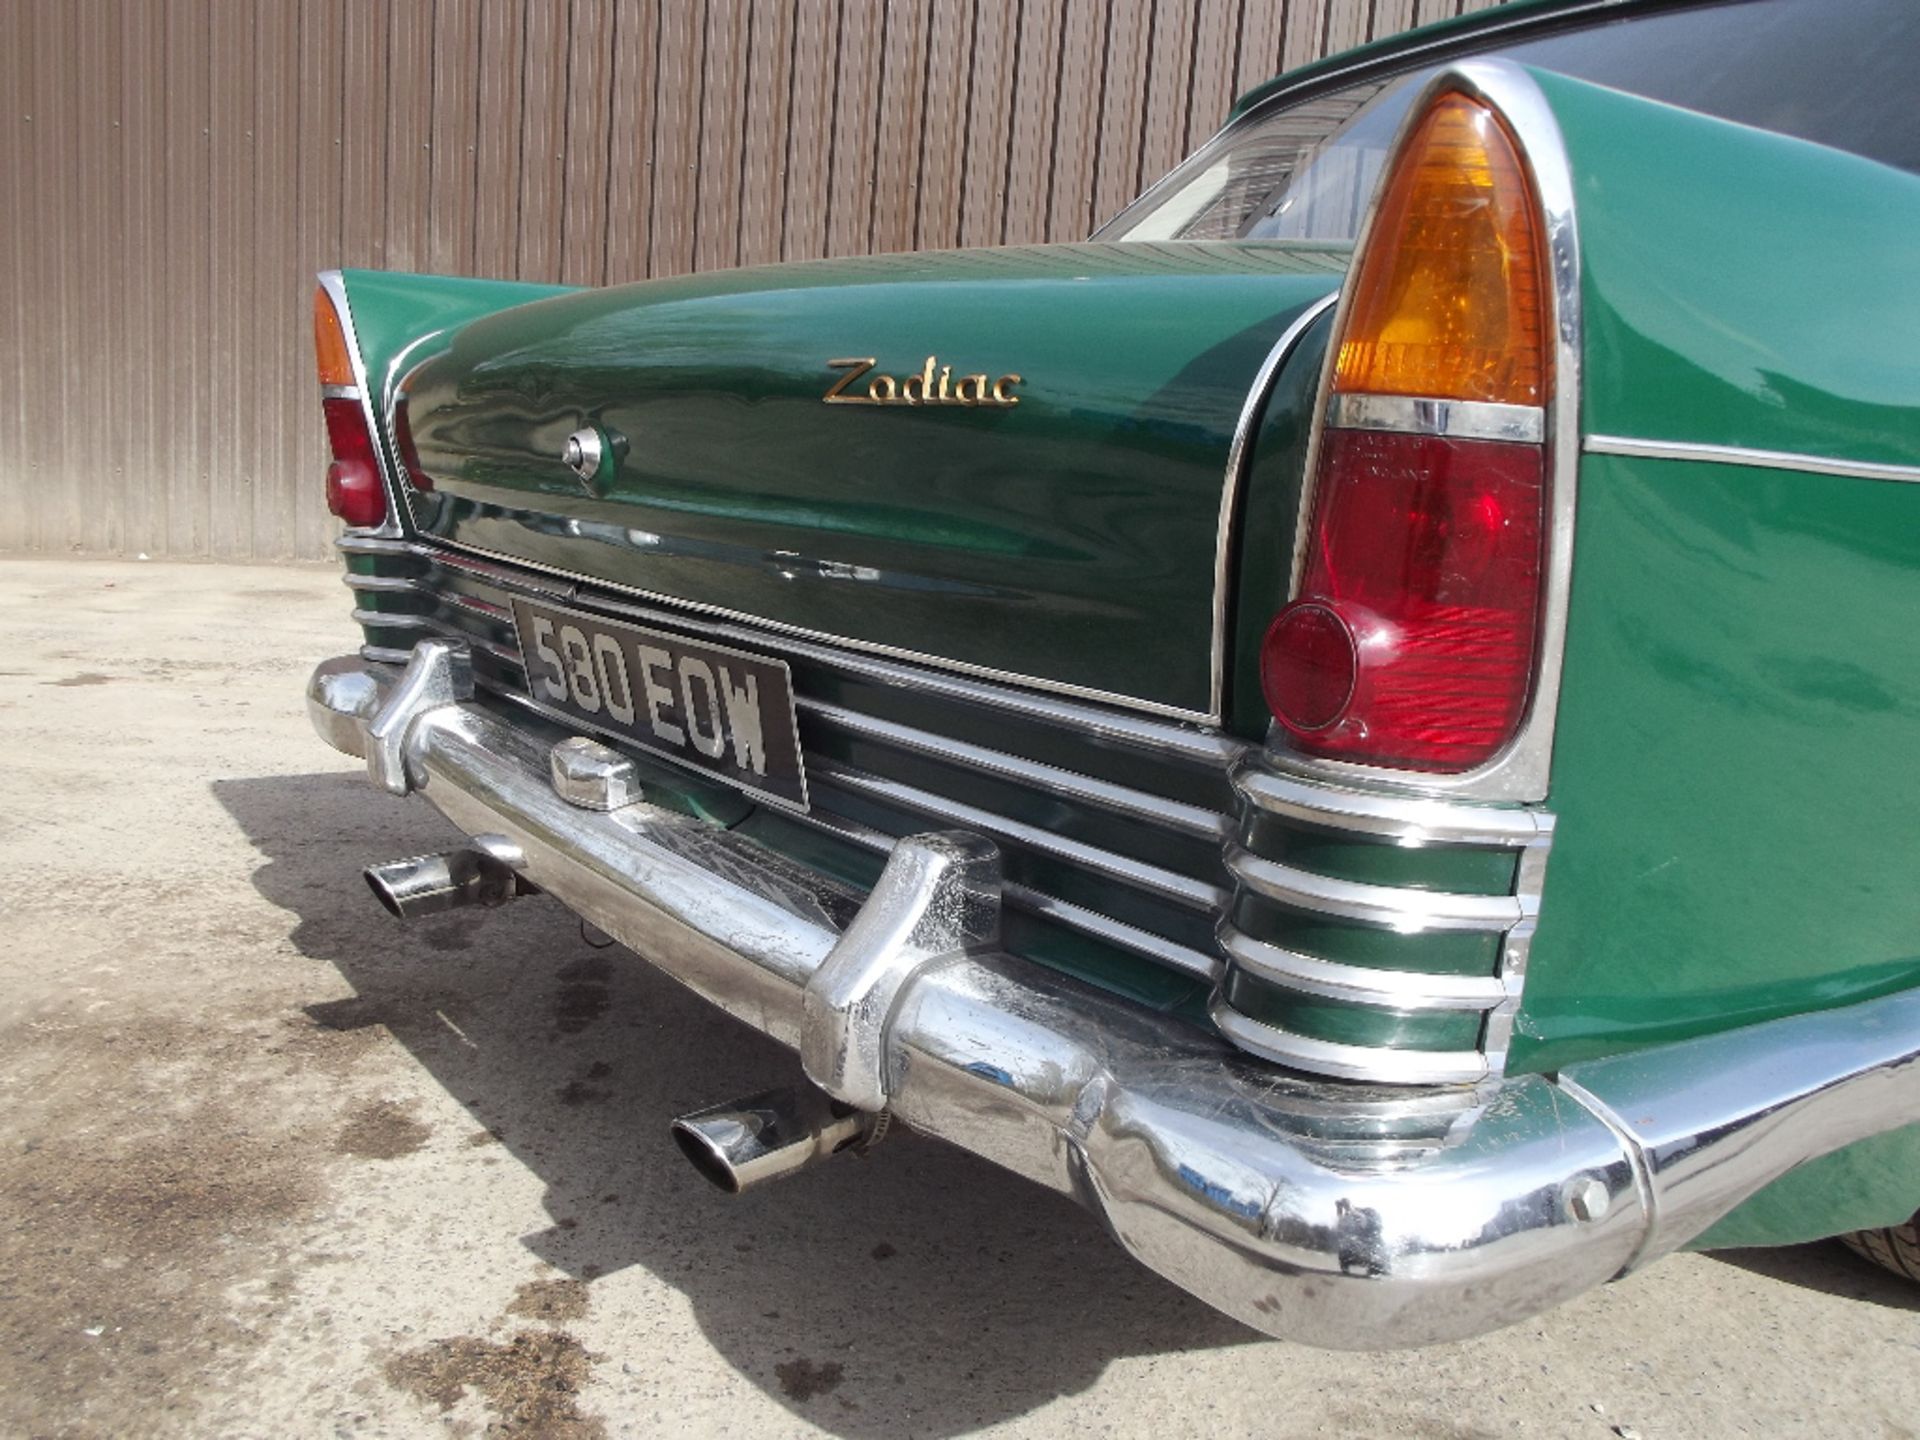 A 1963 Ford Zodiac Mk III, registration number 580 EOW, chassis number Z64C-186080, green. The Mk - Image 5 of 6